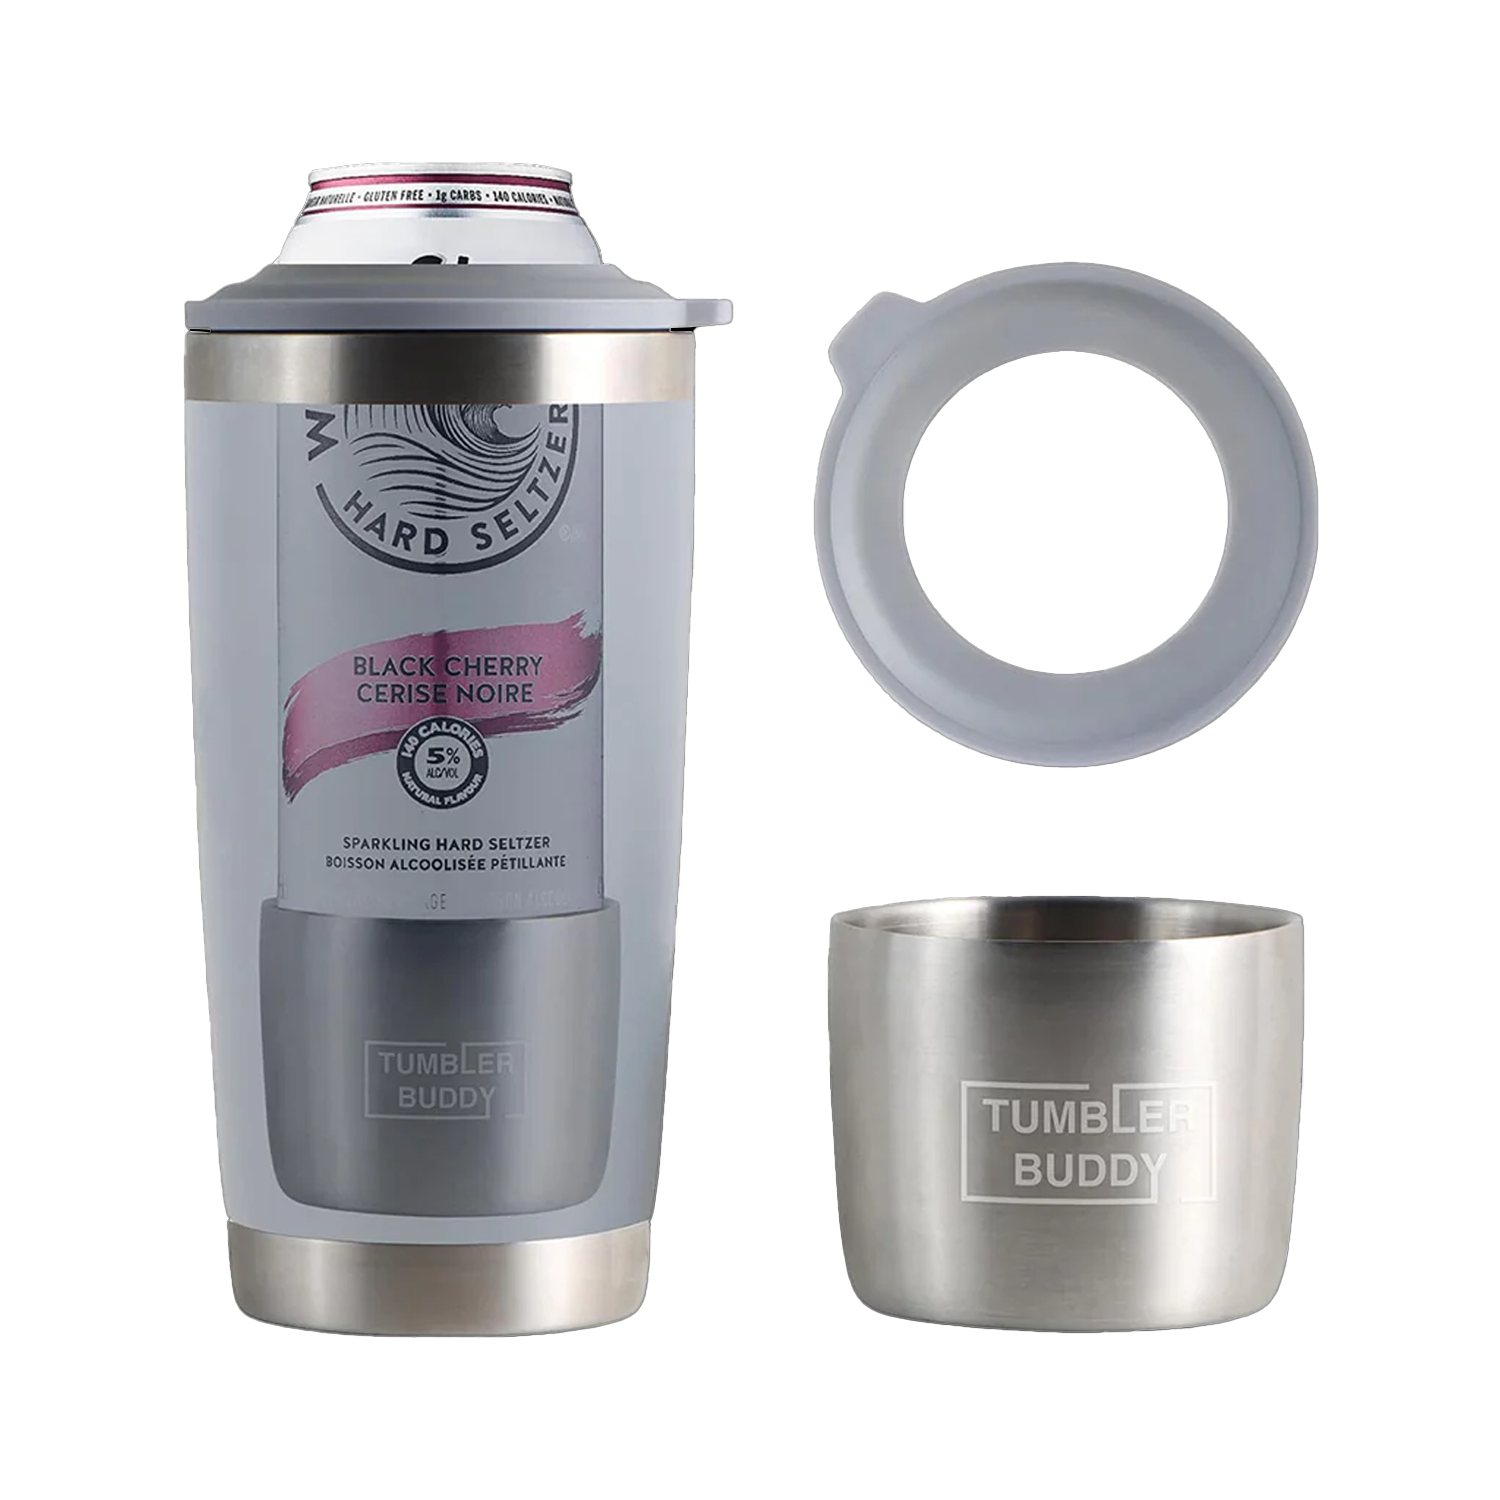 Using and Caring for your Thermos Stainless King 16 oz. Travel Tumbler 